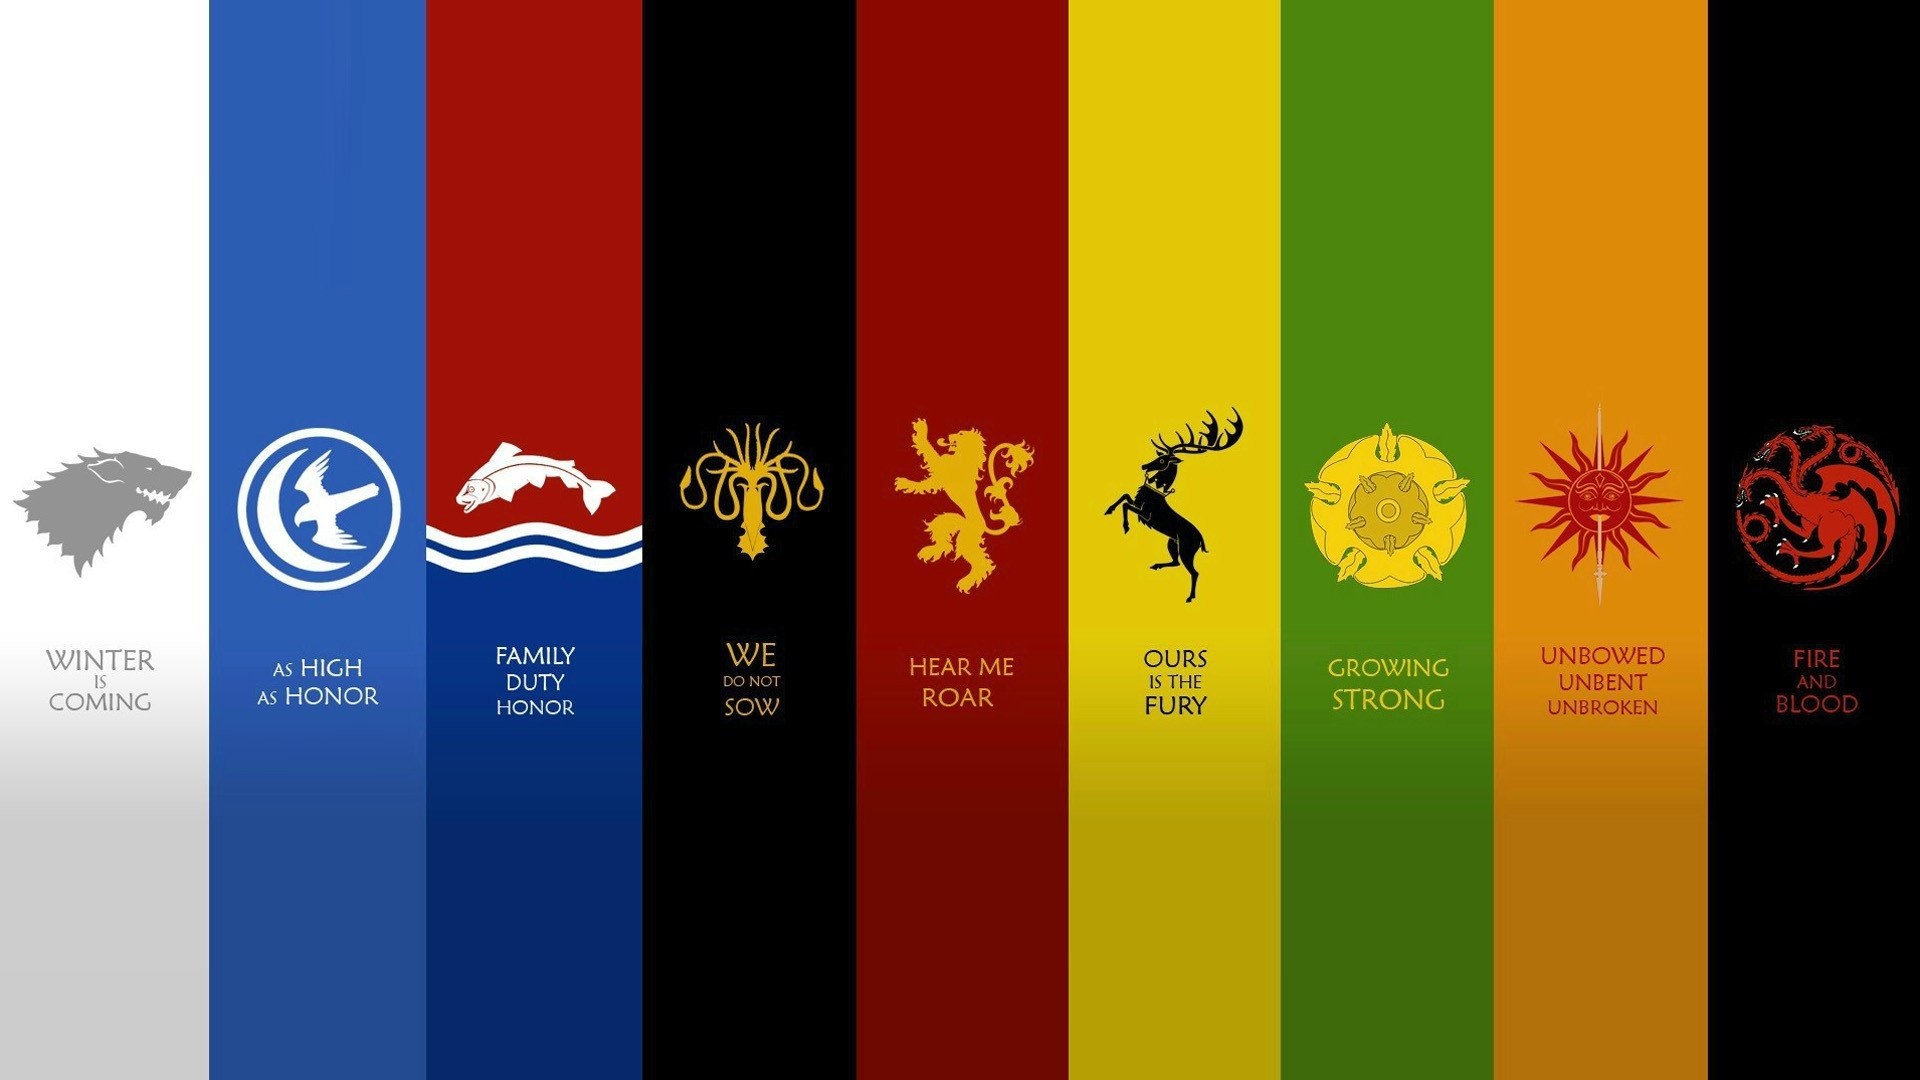 A Song Of Ice And Fire Emblems Fantasy Art Game Thrones George R. Martin  House Arryn Baratheon Greyjoy Lannister Mormont Houses Stark Targaryen  Tully Quotes …